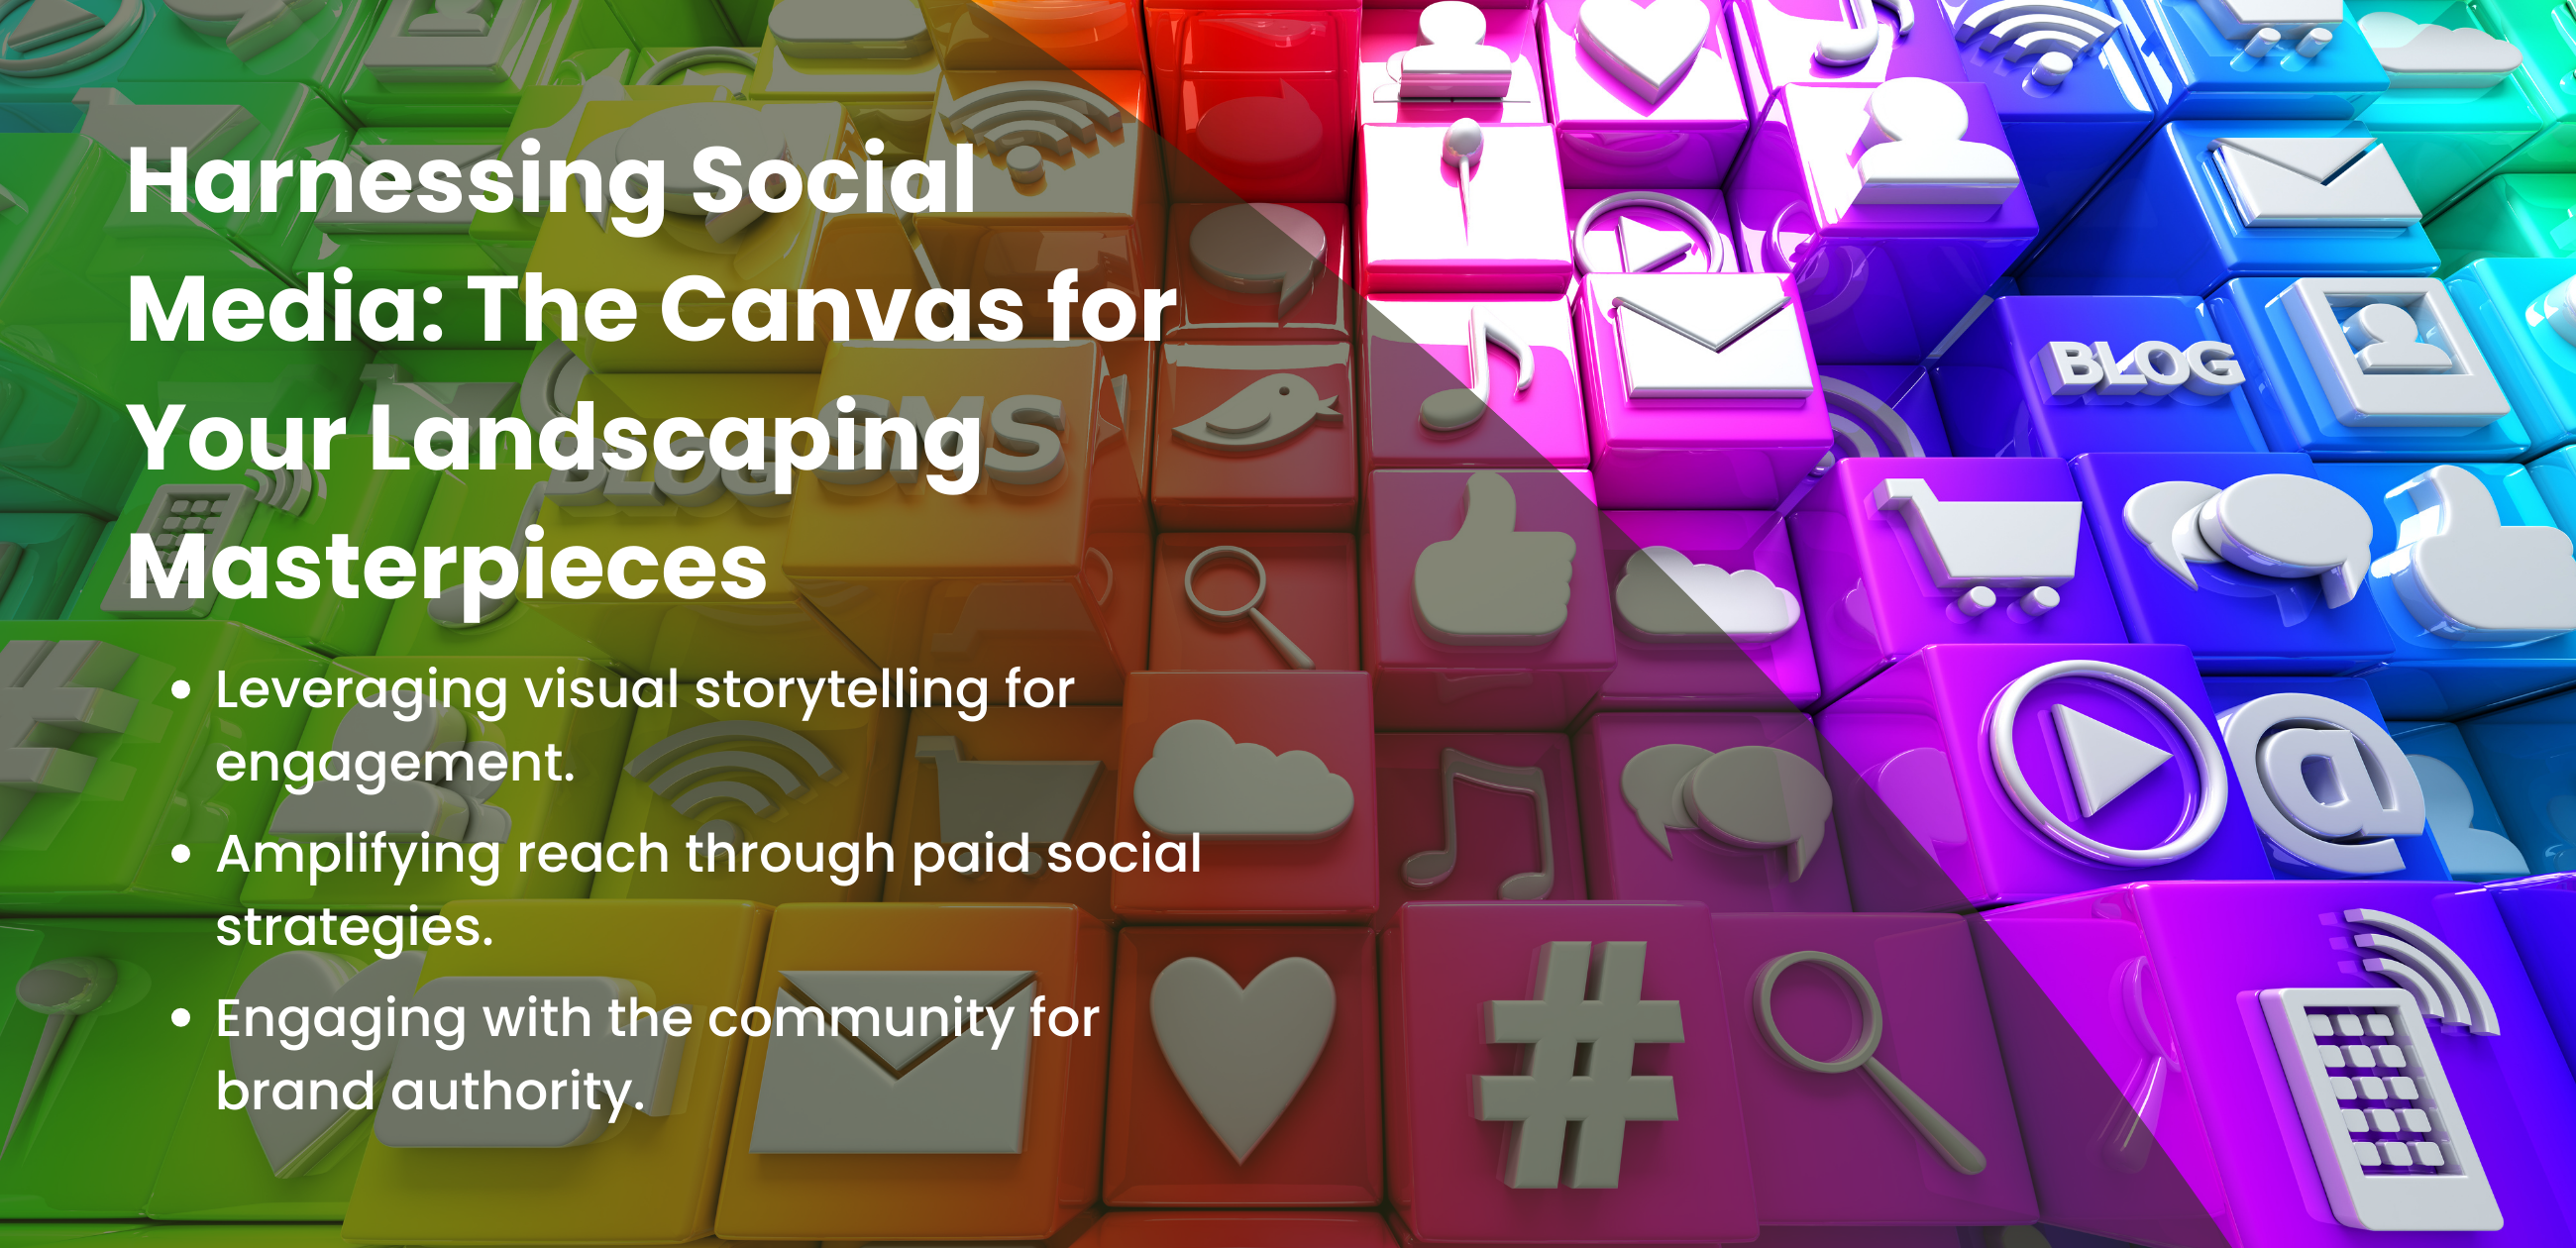 Harnessing Social Media: The Canvas for Your Landscaping Masterpieces